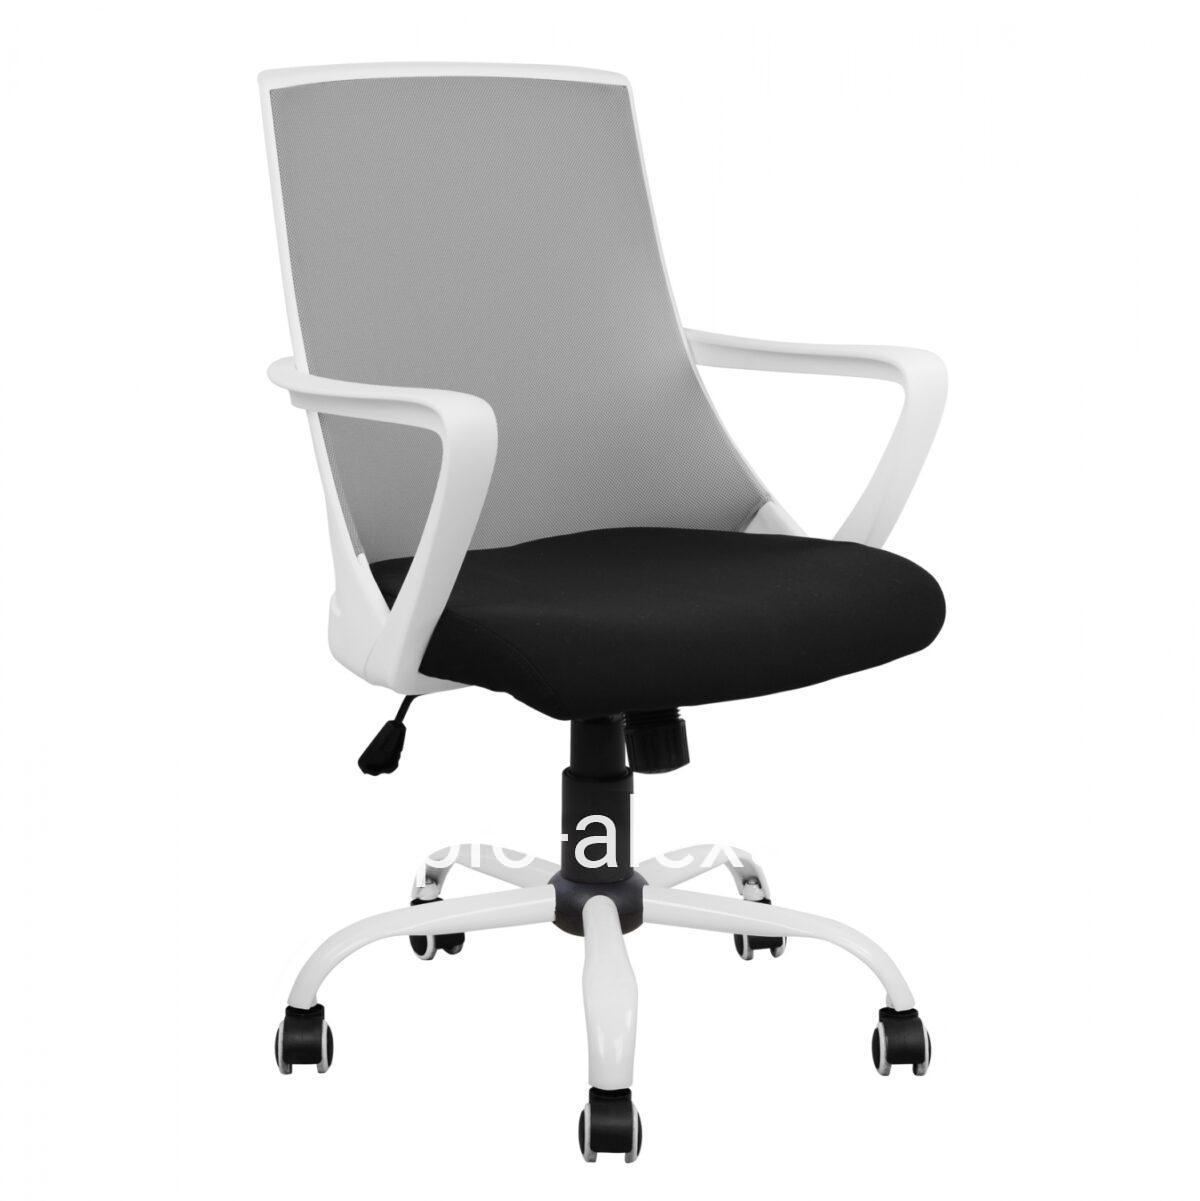 Office chair HM1053.21 Grey with mesh and metal base 58x59x103 cm